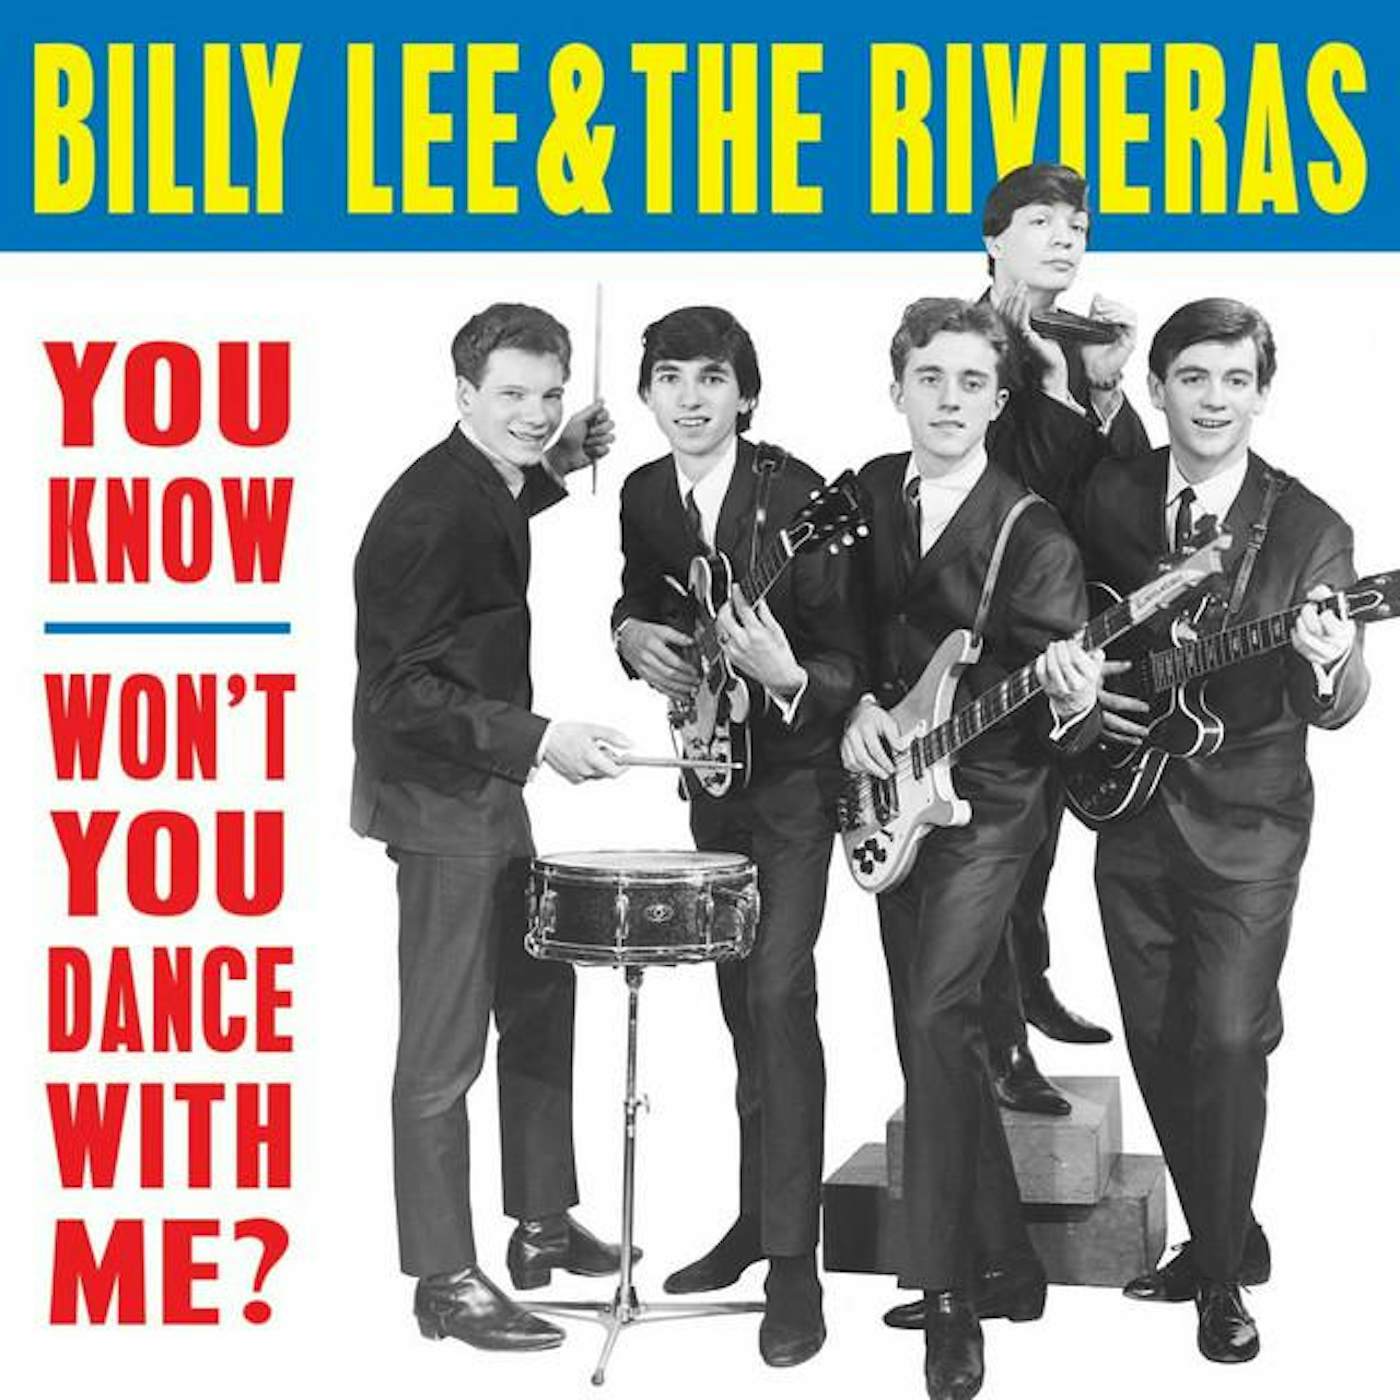 Billy Lee and the Rivieras